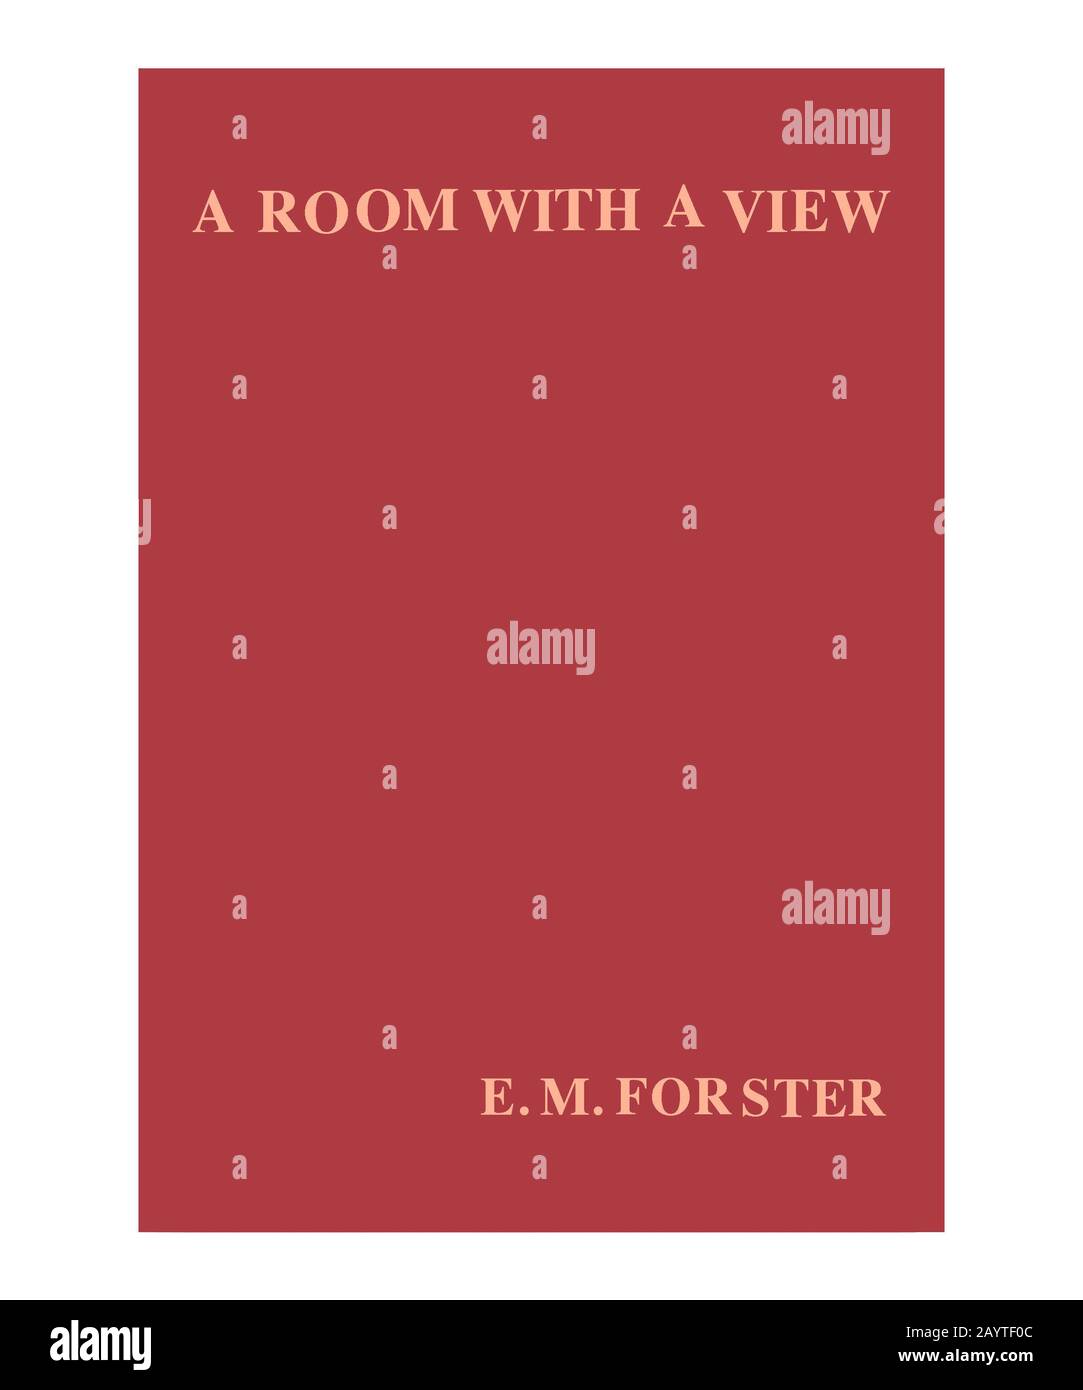 Forster A Room with a View Book Cover cleaned and reset Stock Photo